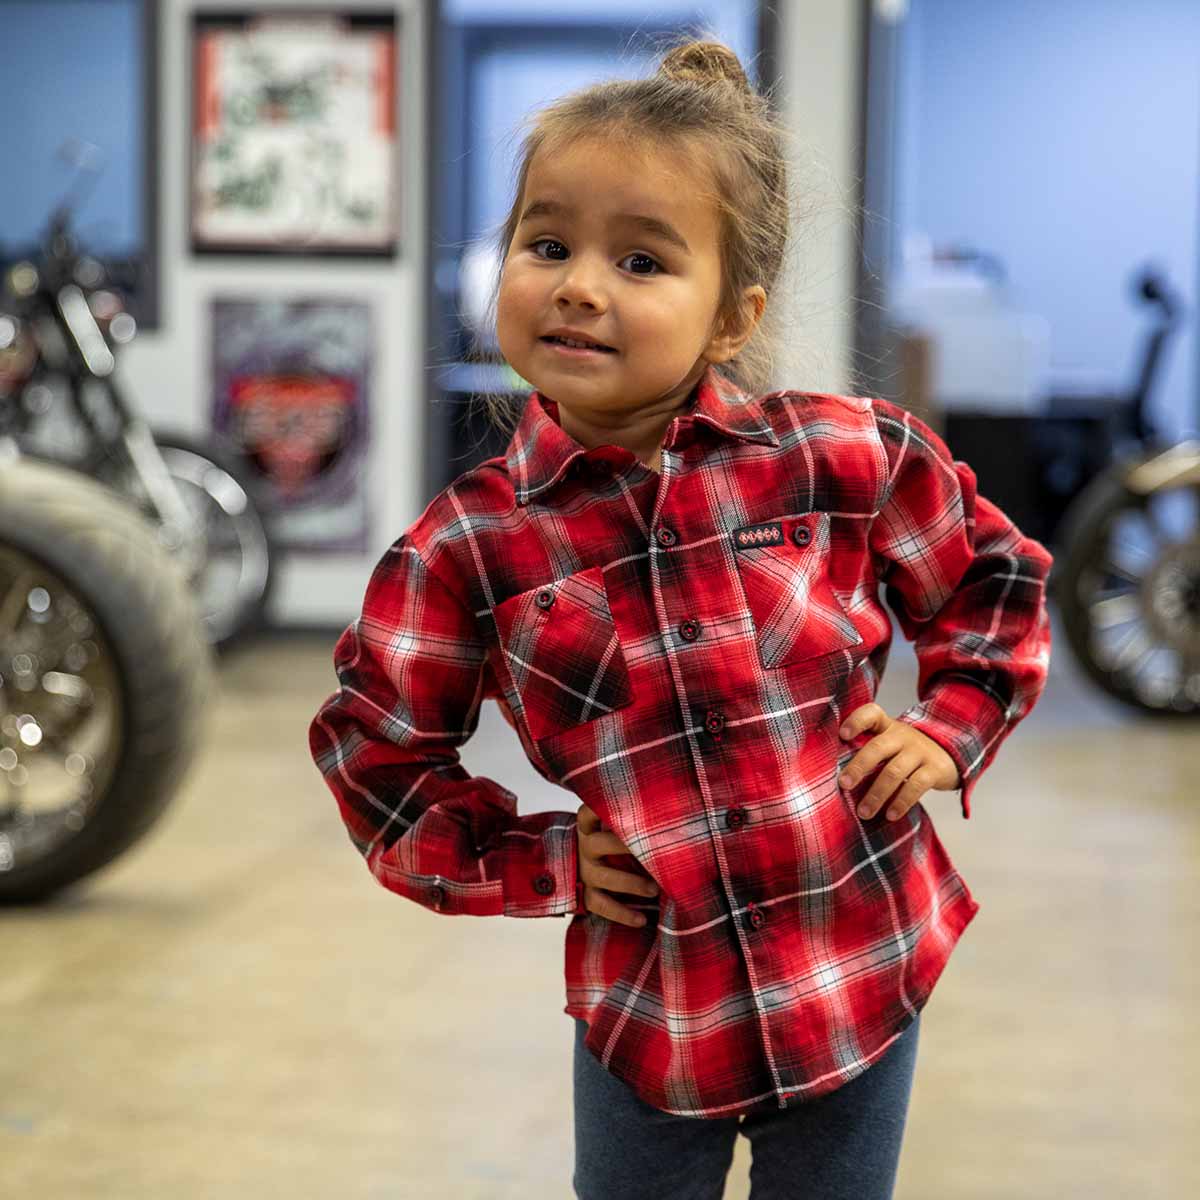 Klock Werks x Dixxon Tribute Flannel for Youth This little cutie is wearing an X-Small Klock Werks x Dixxon Tribute Flannel for Youth